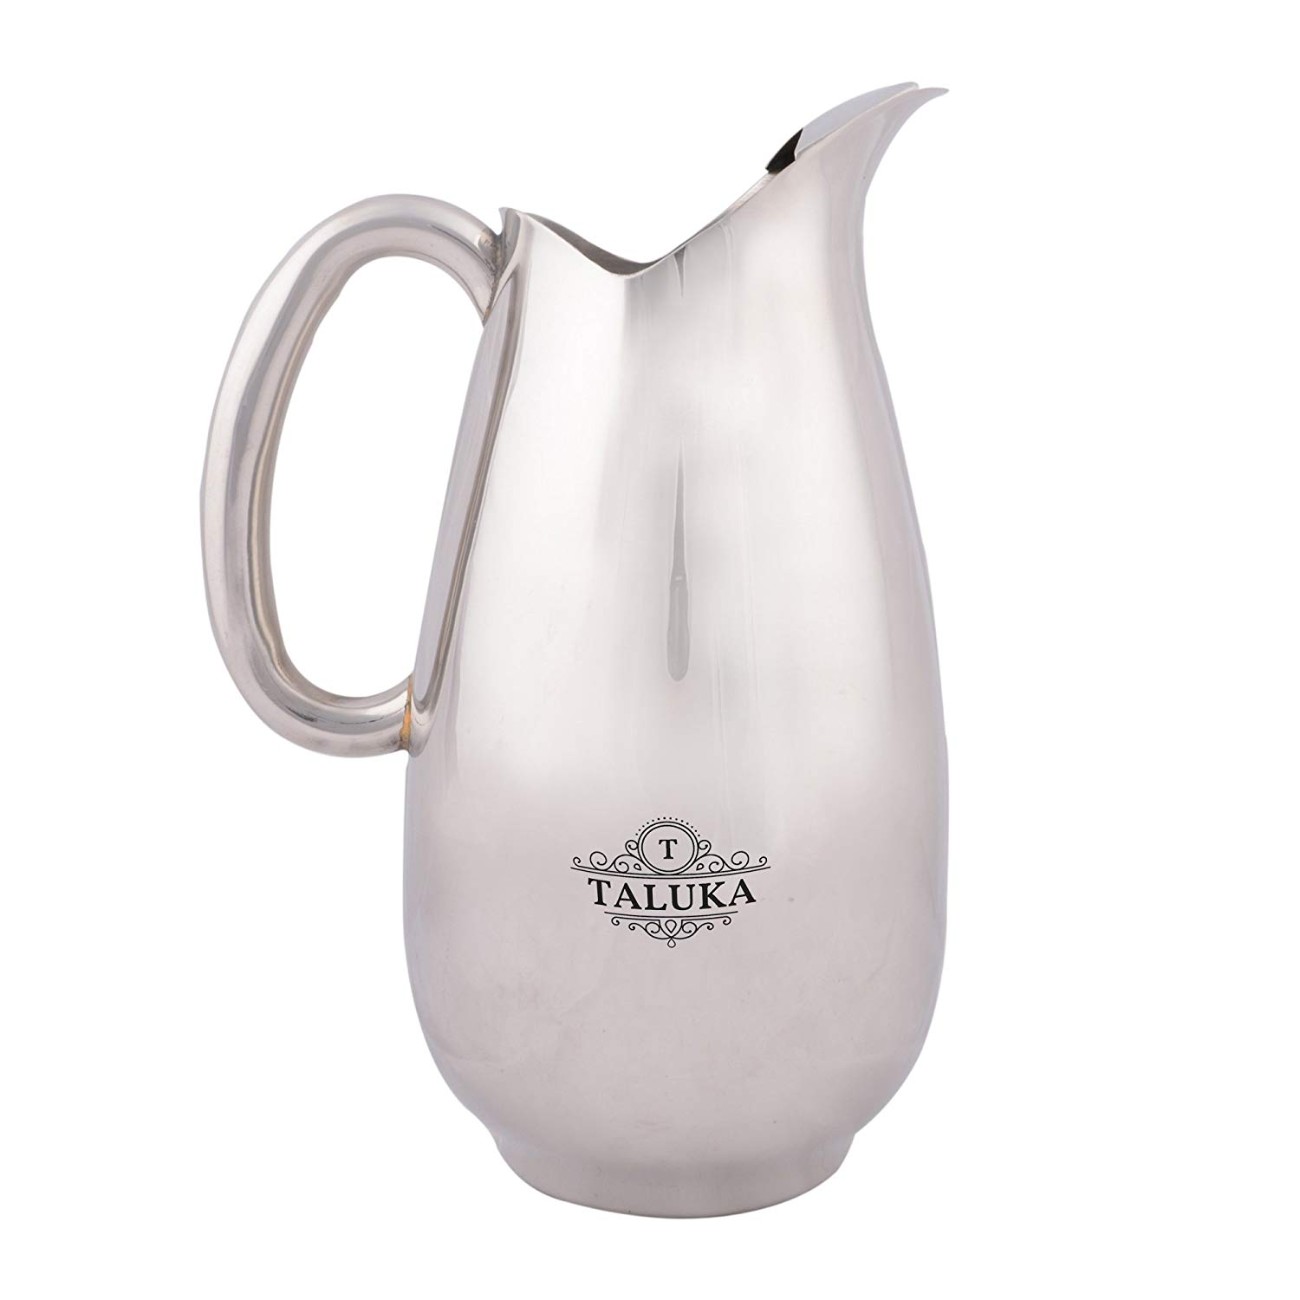 Stainless Steel Jug Pitcher For Drinking Storage 1800 ML Hotel Bar Restaurant Home Use